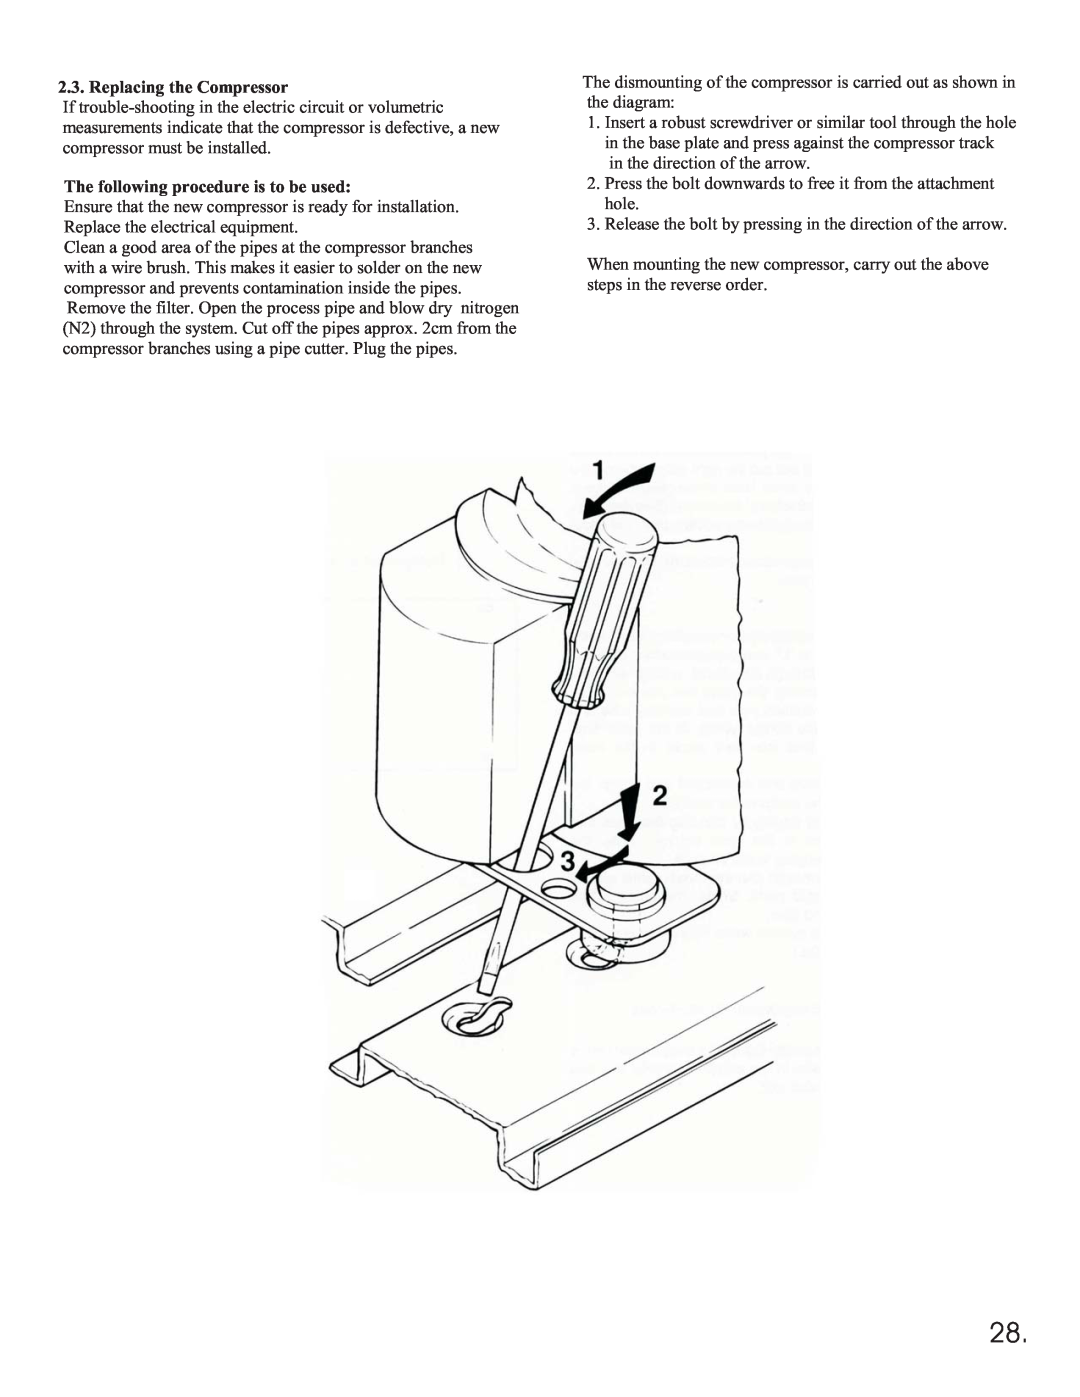 Equator 375 service manual Replacing the Compressor, The following procedure is to be used 